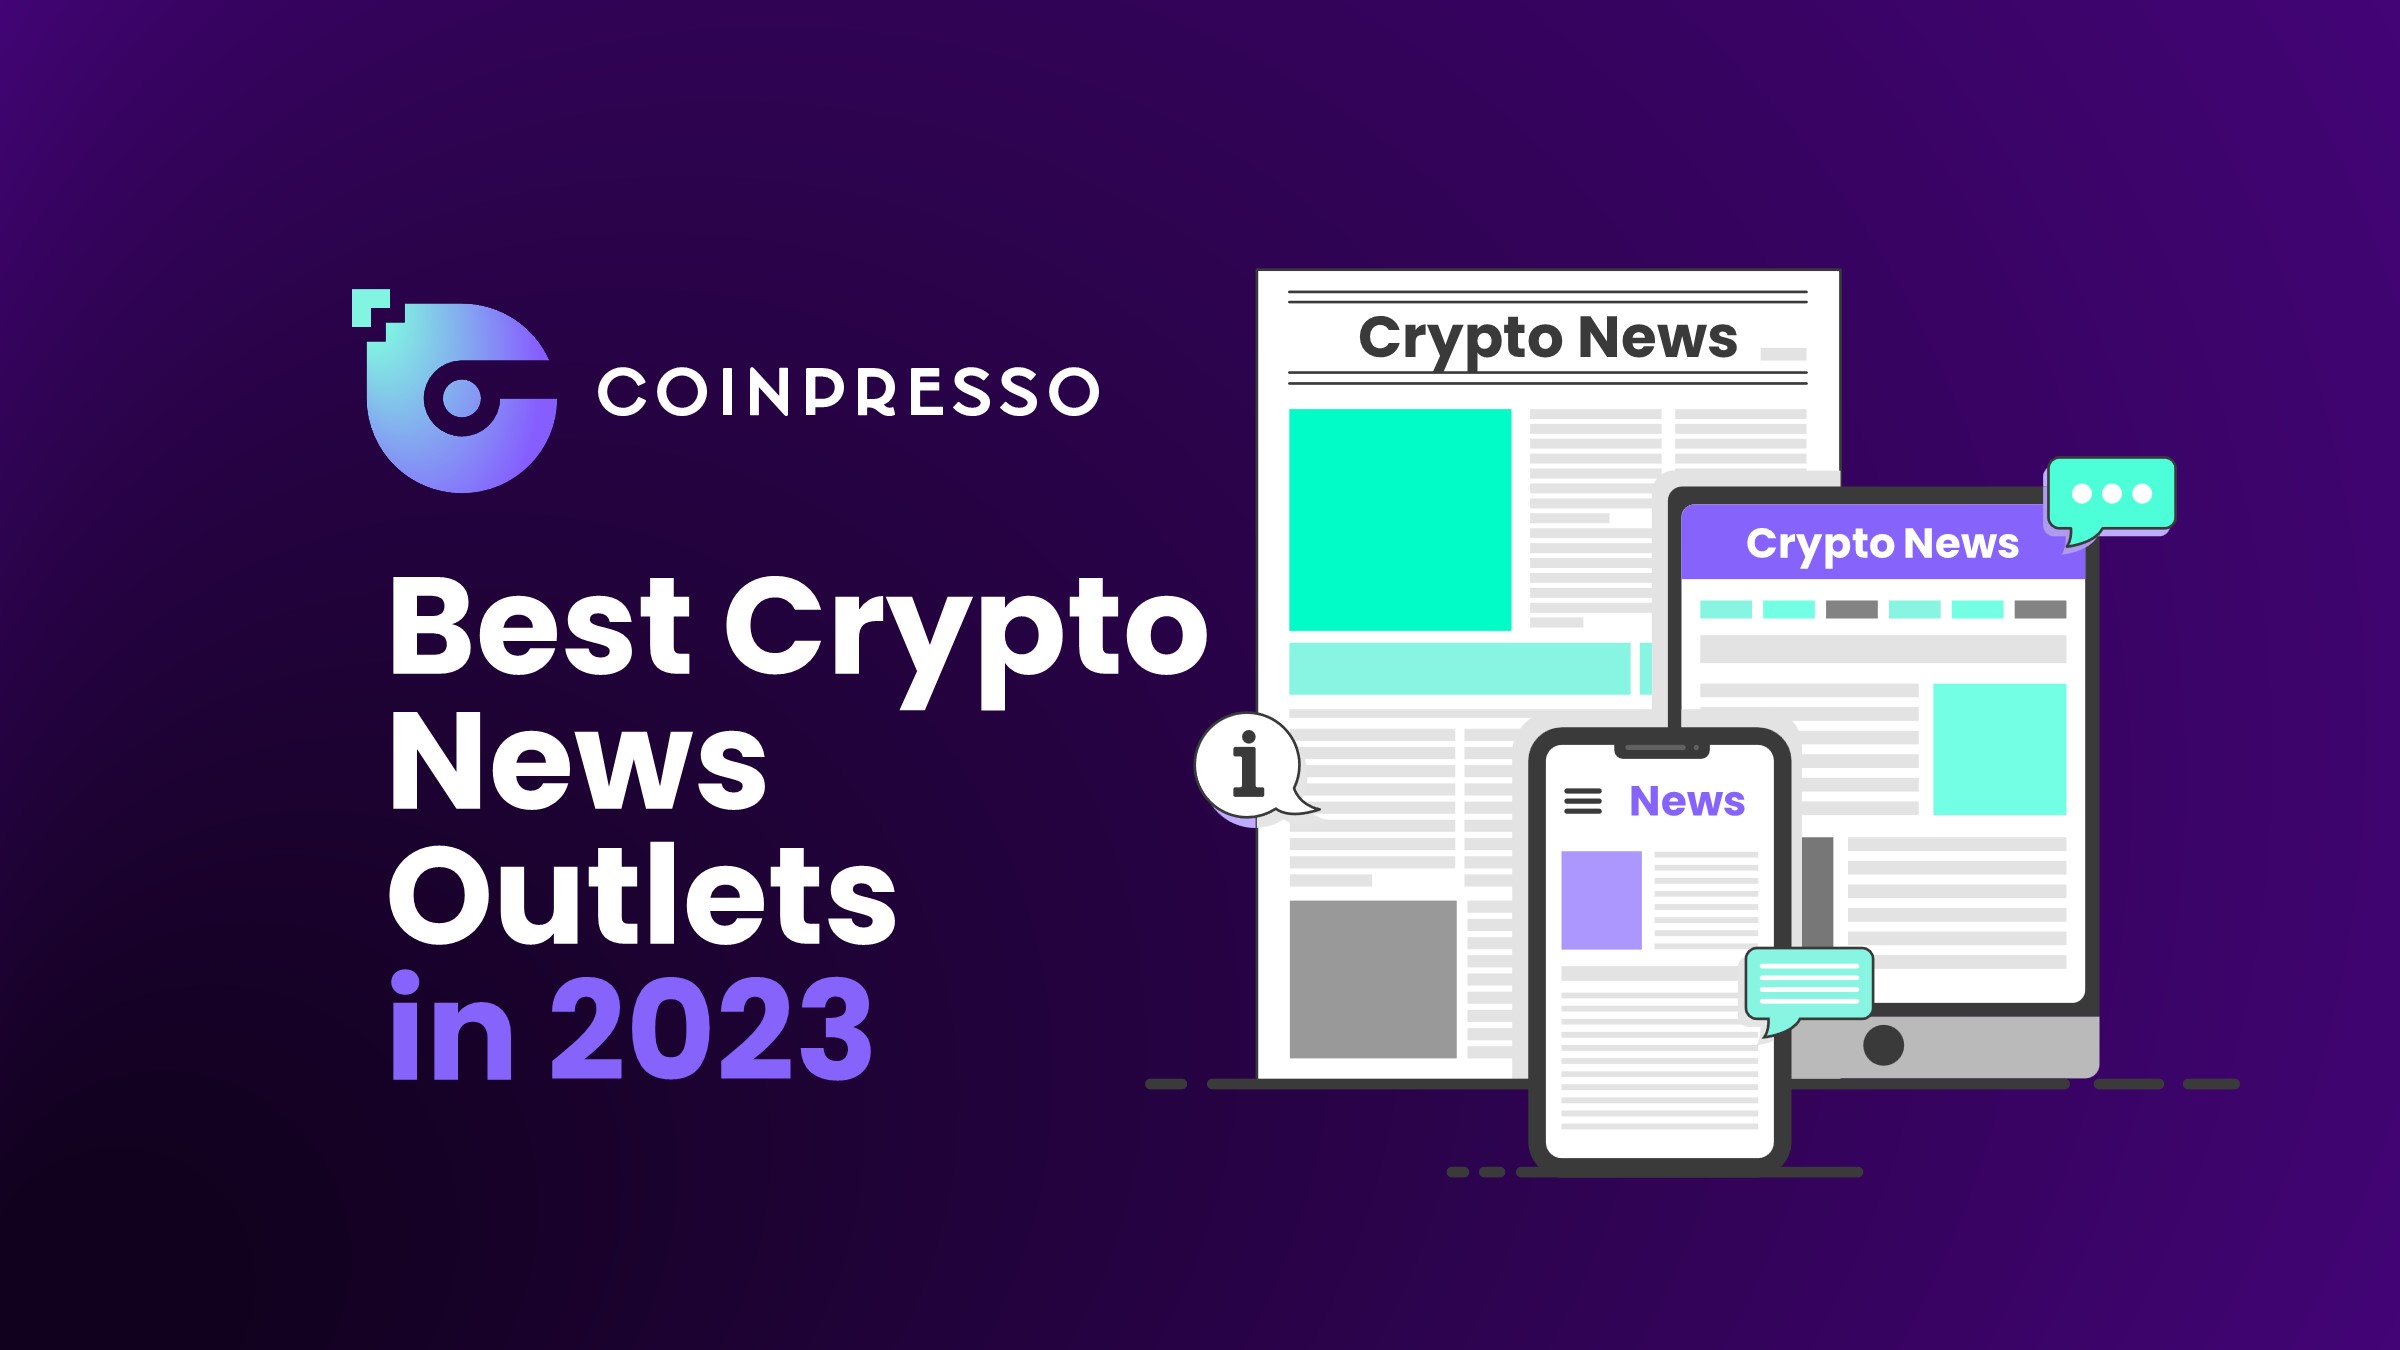 Best Crypto News Outlets in 2023